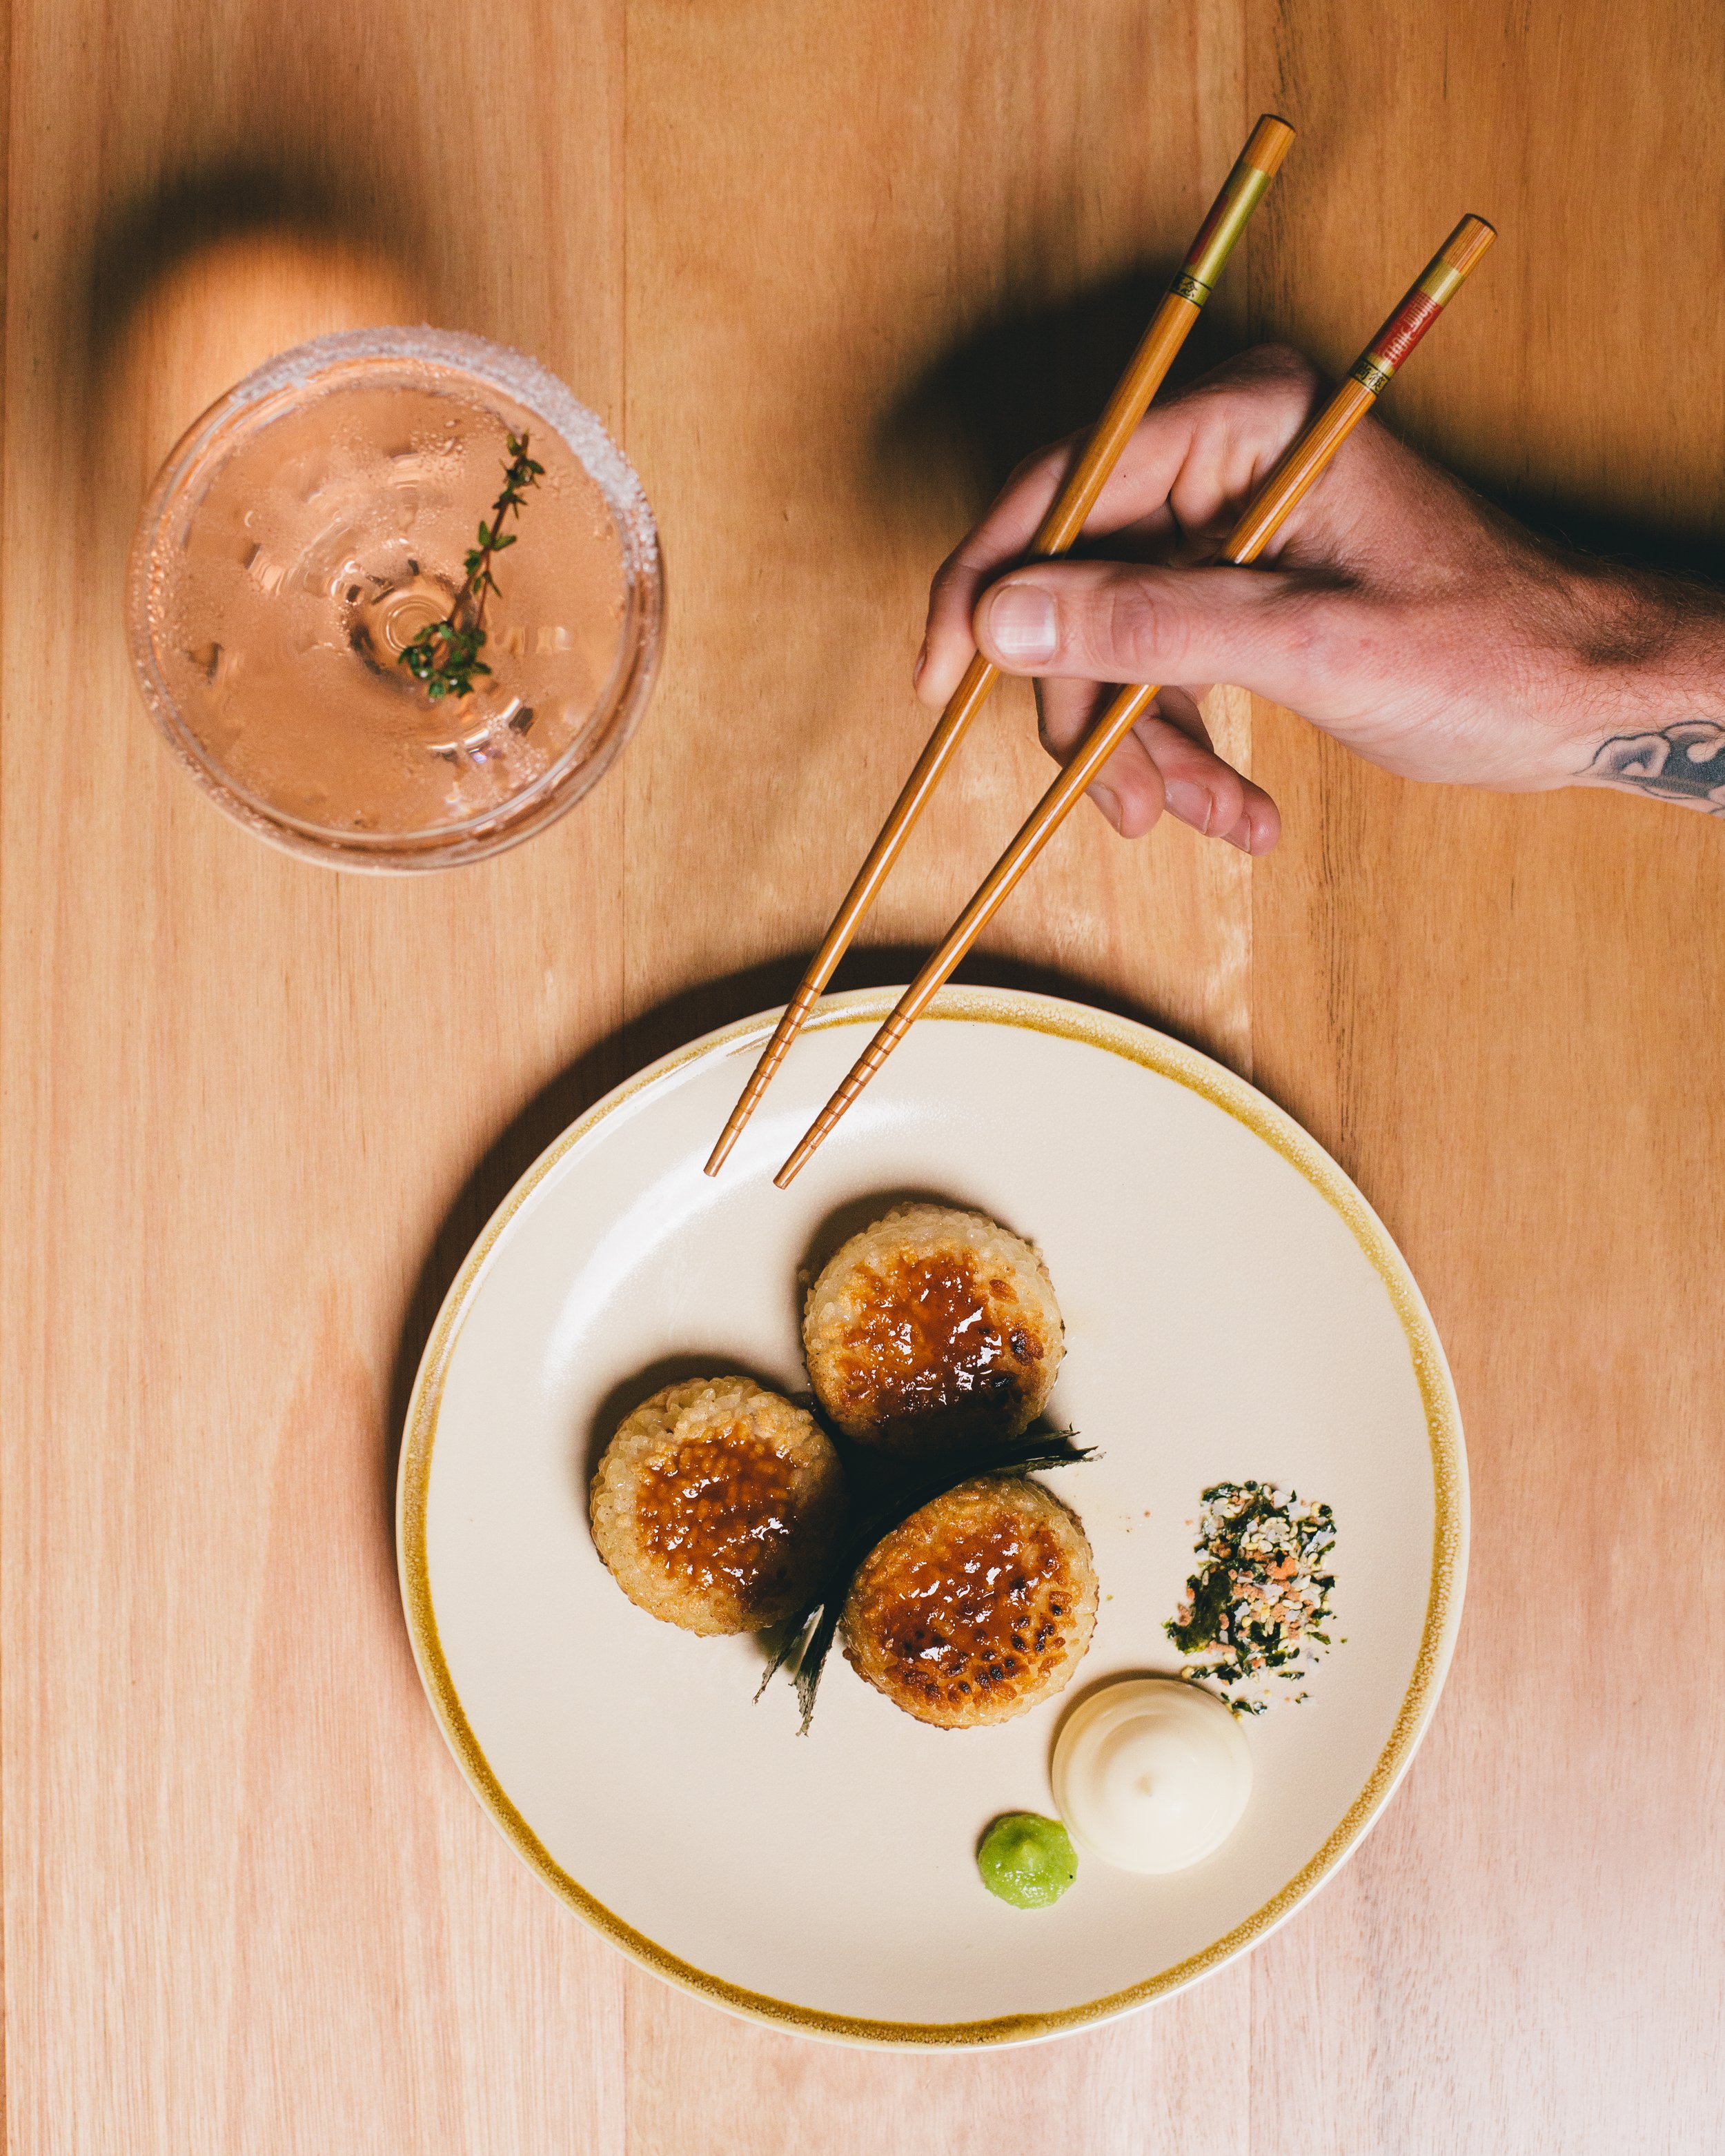 THIRROUL IS NOW HOME TO A BUZZING IZAKAYA-STYLE RESTAURANT AND BAR, CHIBA NIGHTS